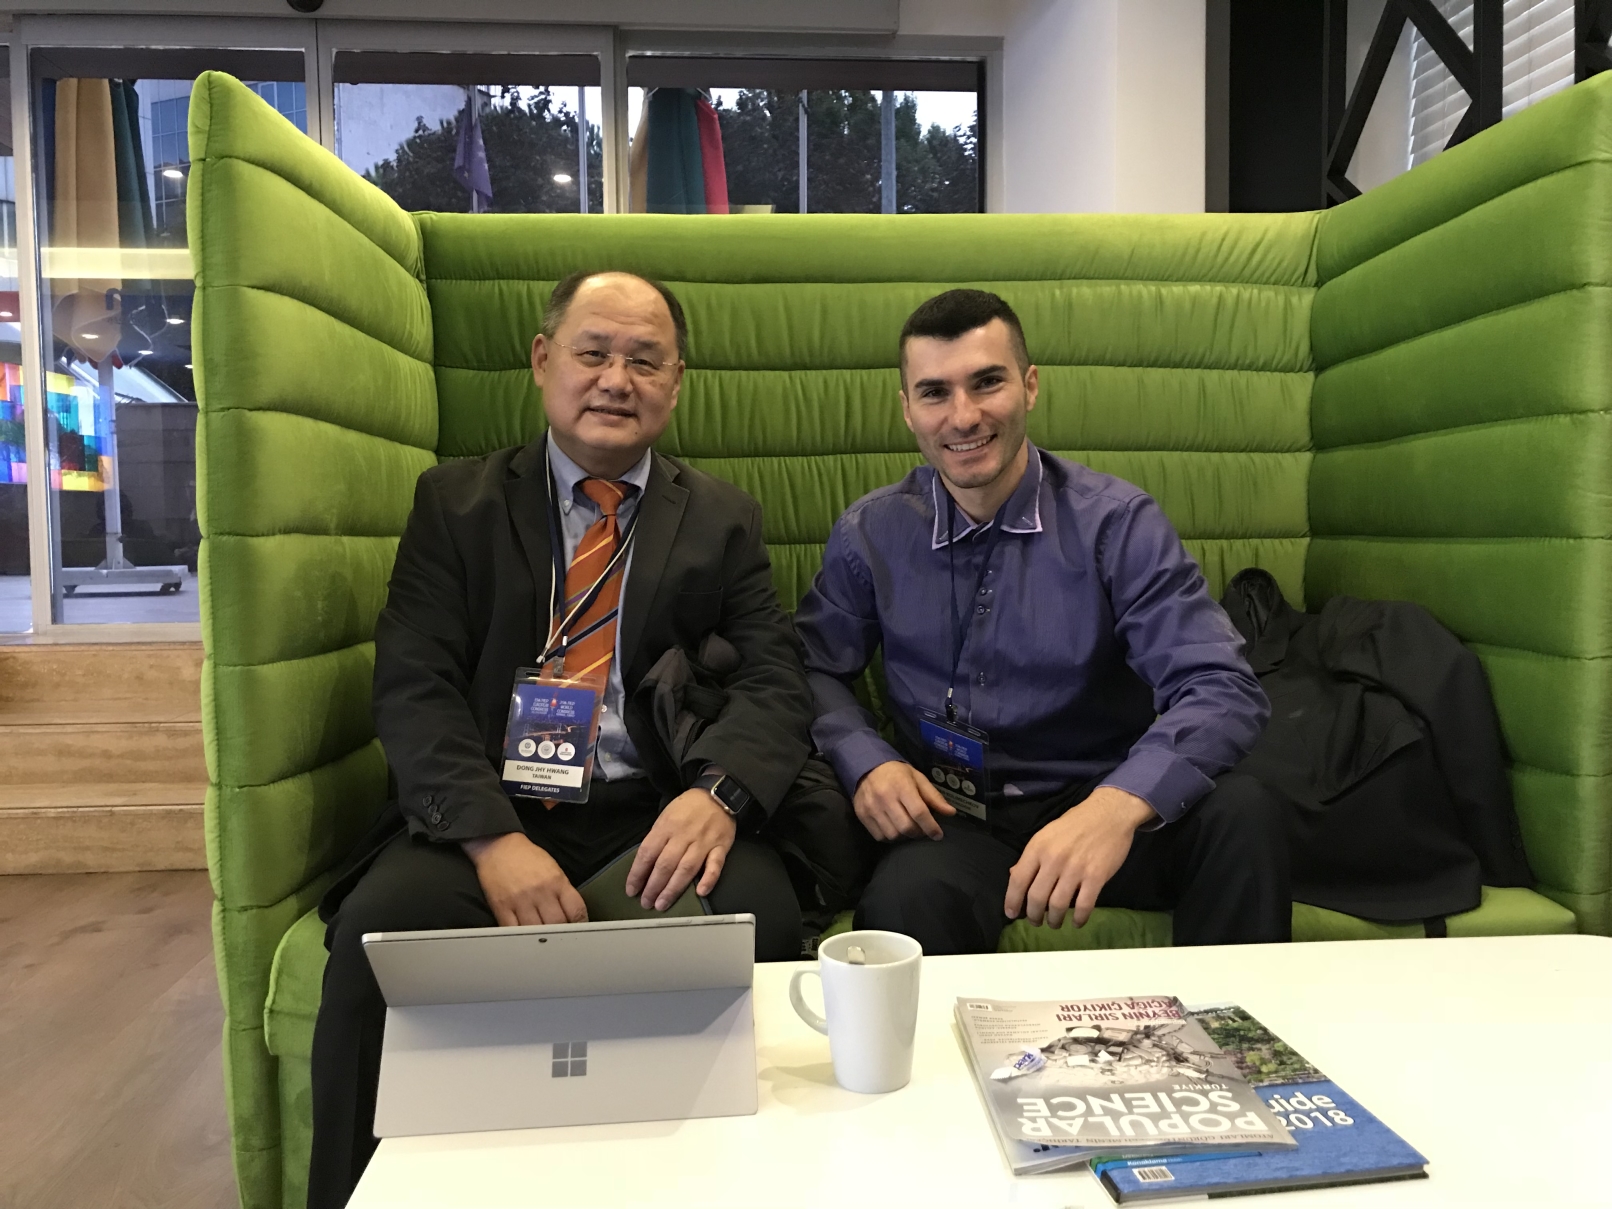 Prof Tony Hwang and Dr Stefan Kolimechkov at the 13th European and 29th World FIEP Congress in Istanbul, 2018